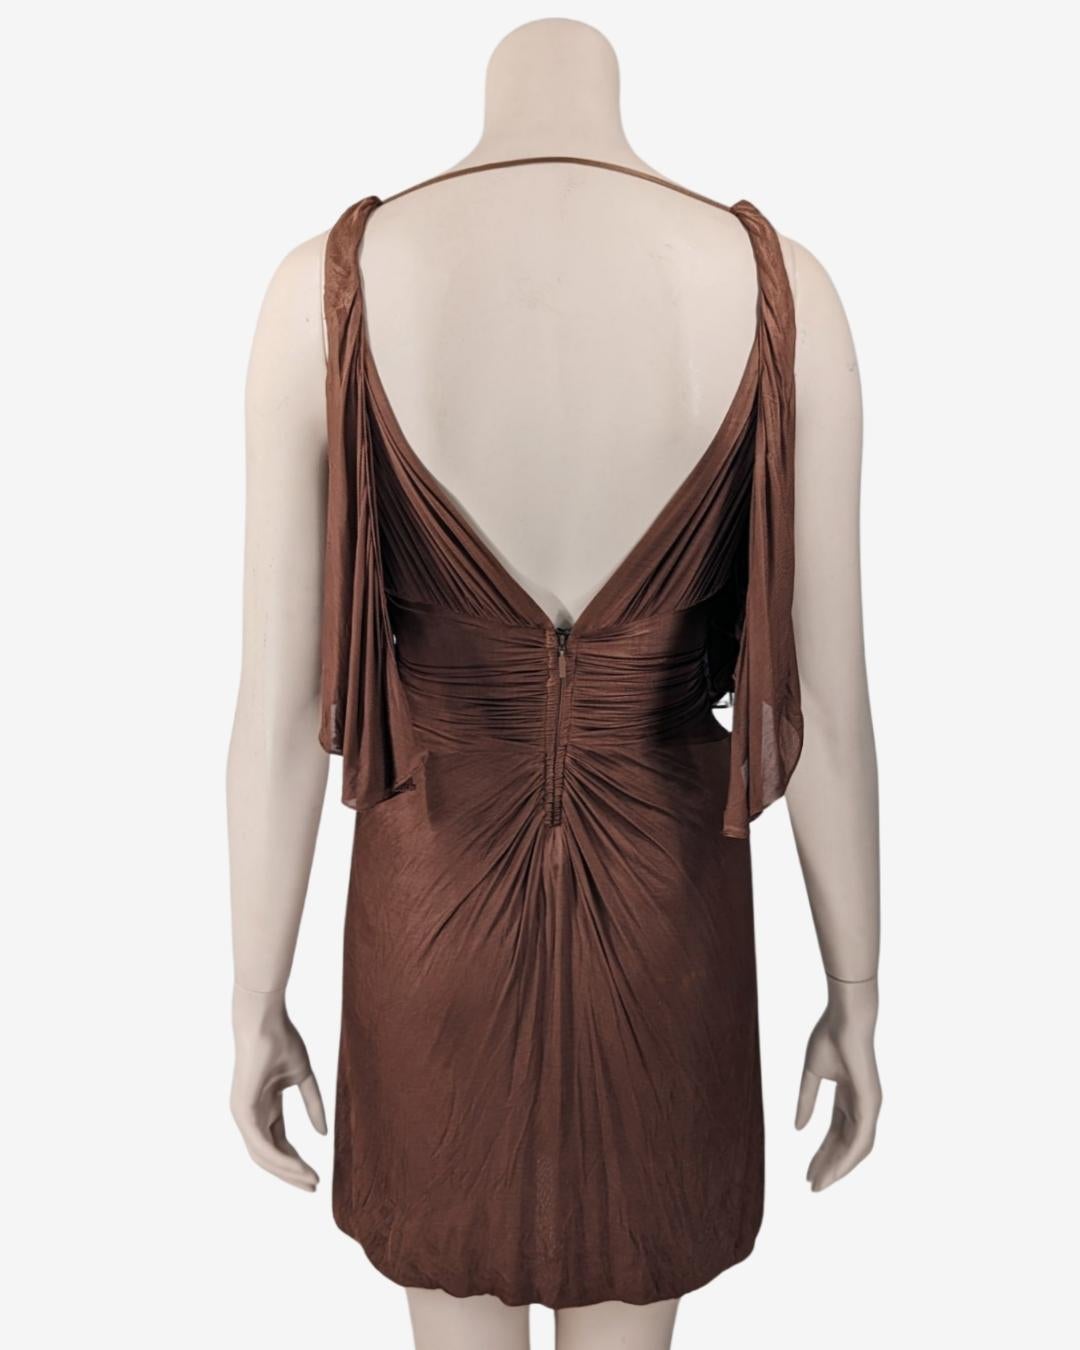 Gucci by Tom Ford Draped Brown Mini Dress S/S 2003 For Sale 2